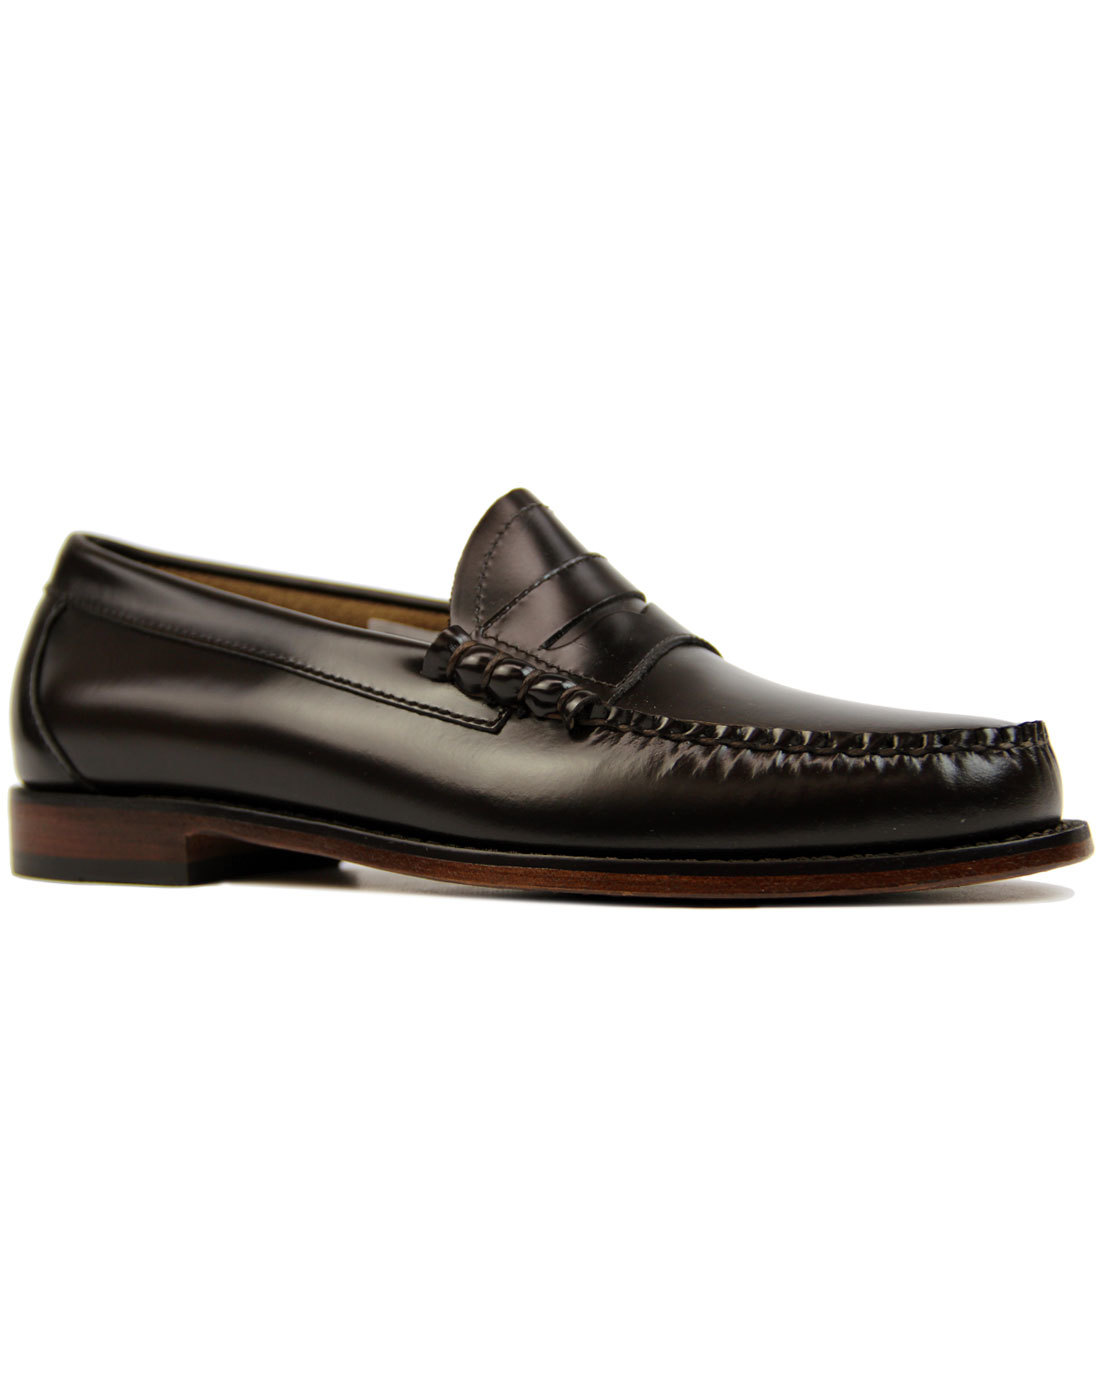 Larson BASS WEEJUNS Mod Penny Loafers (Dark Brown)